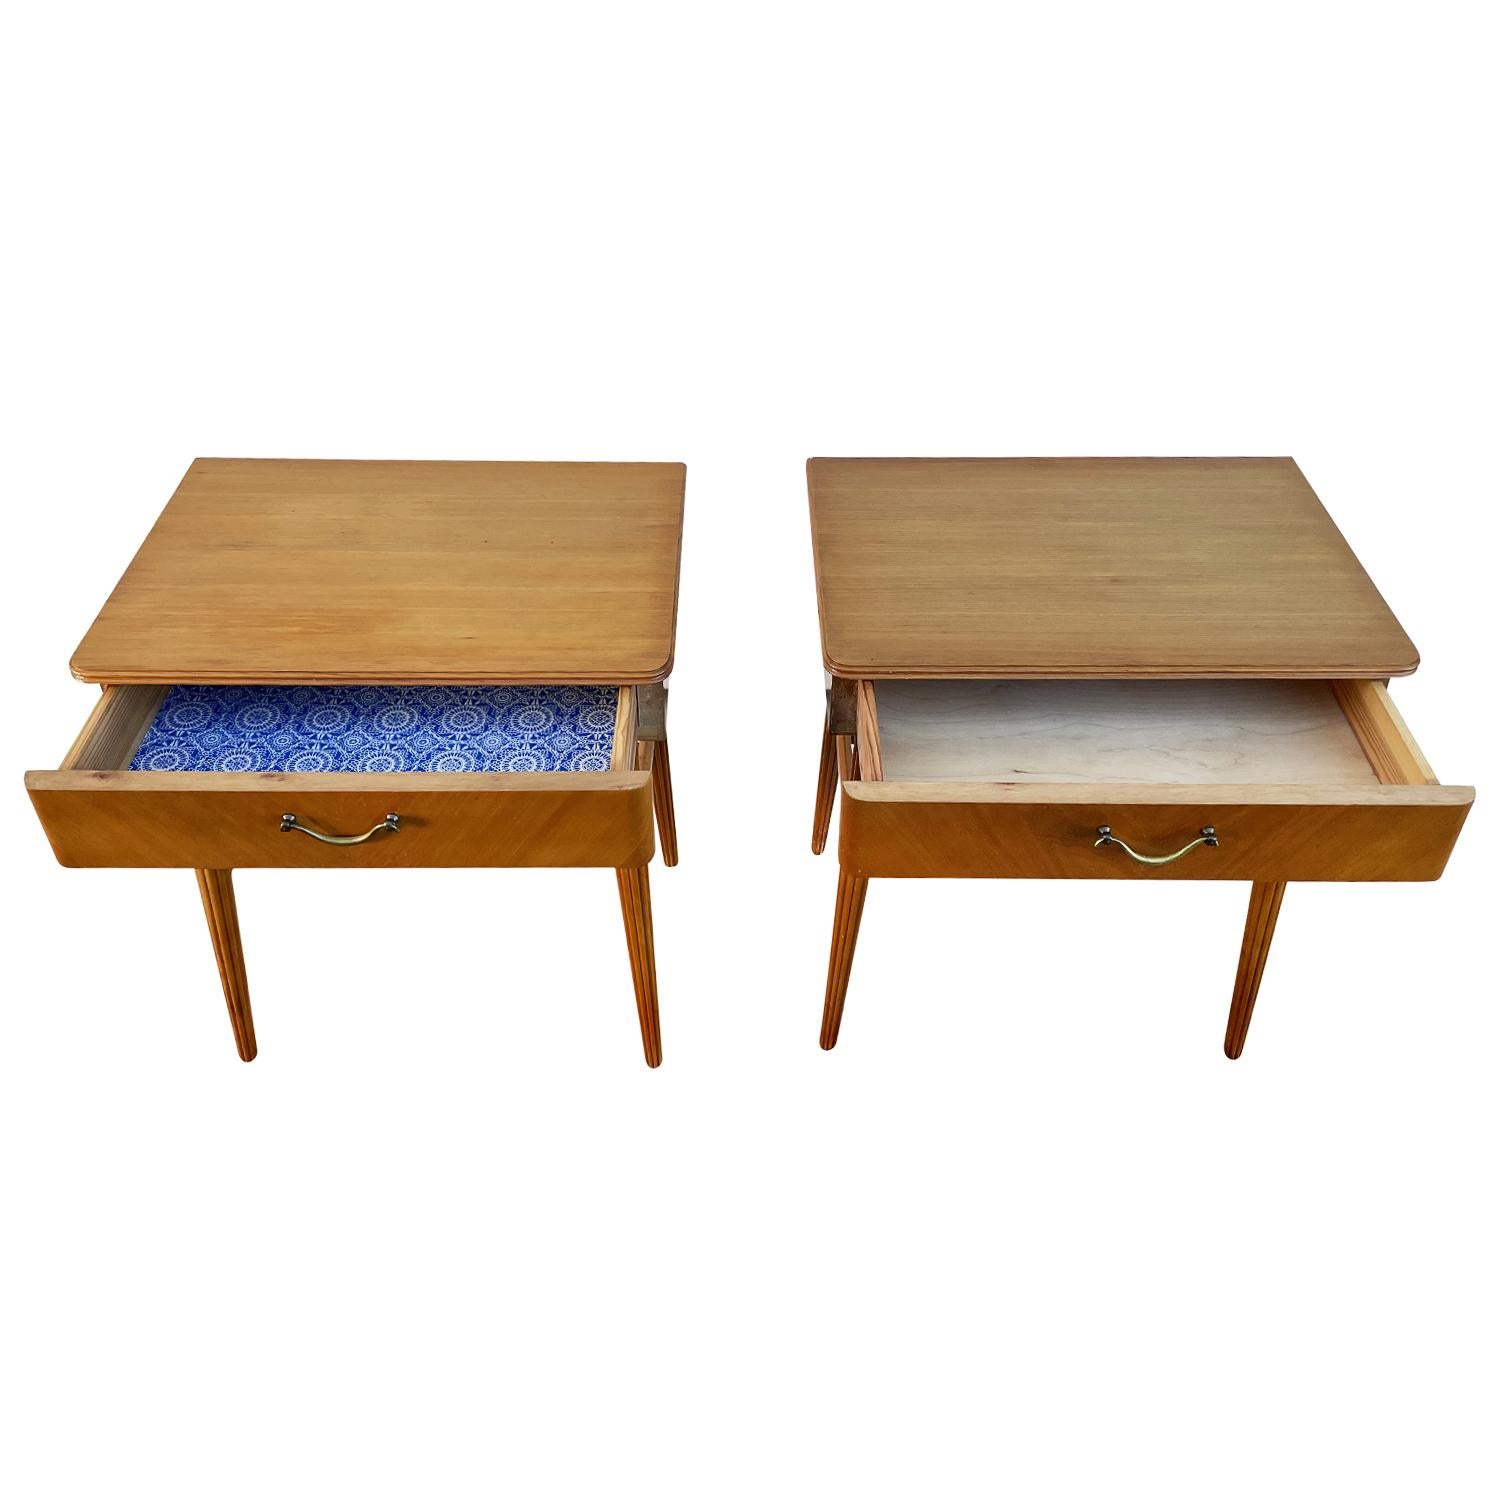 20th Century Danish Pair of Birchwood Nightstands - Vintage Brass Bedside Tables For Sale 2